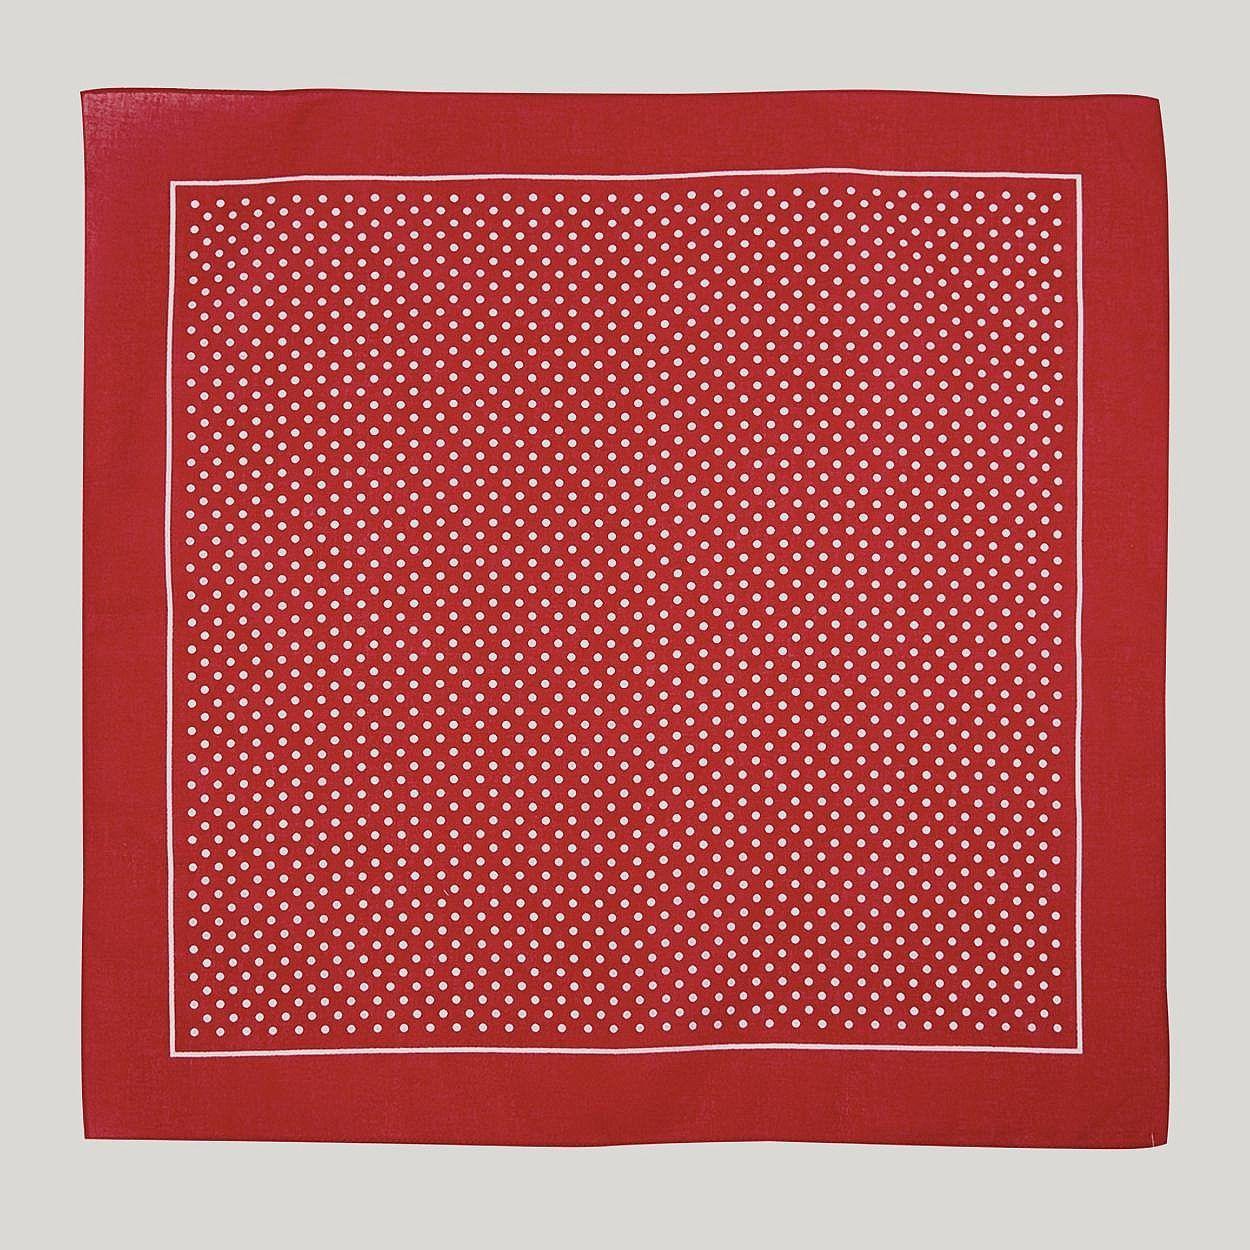 Red Circle with White Spot Logo - Red with White Spot Cotton Handkerchief